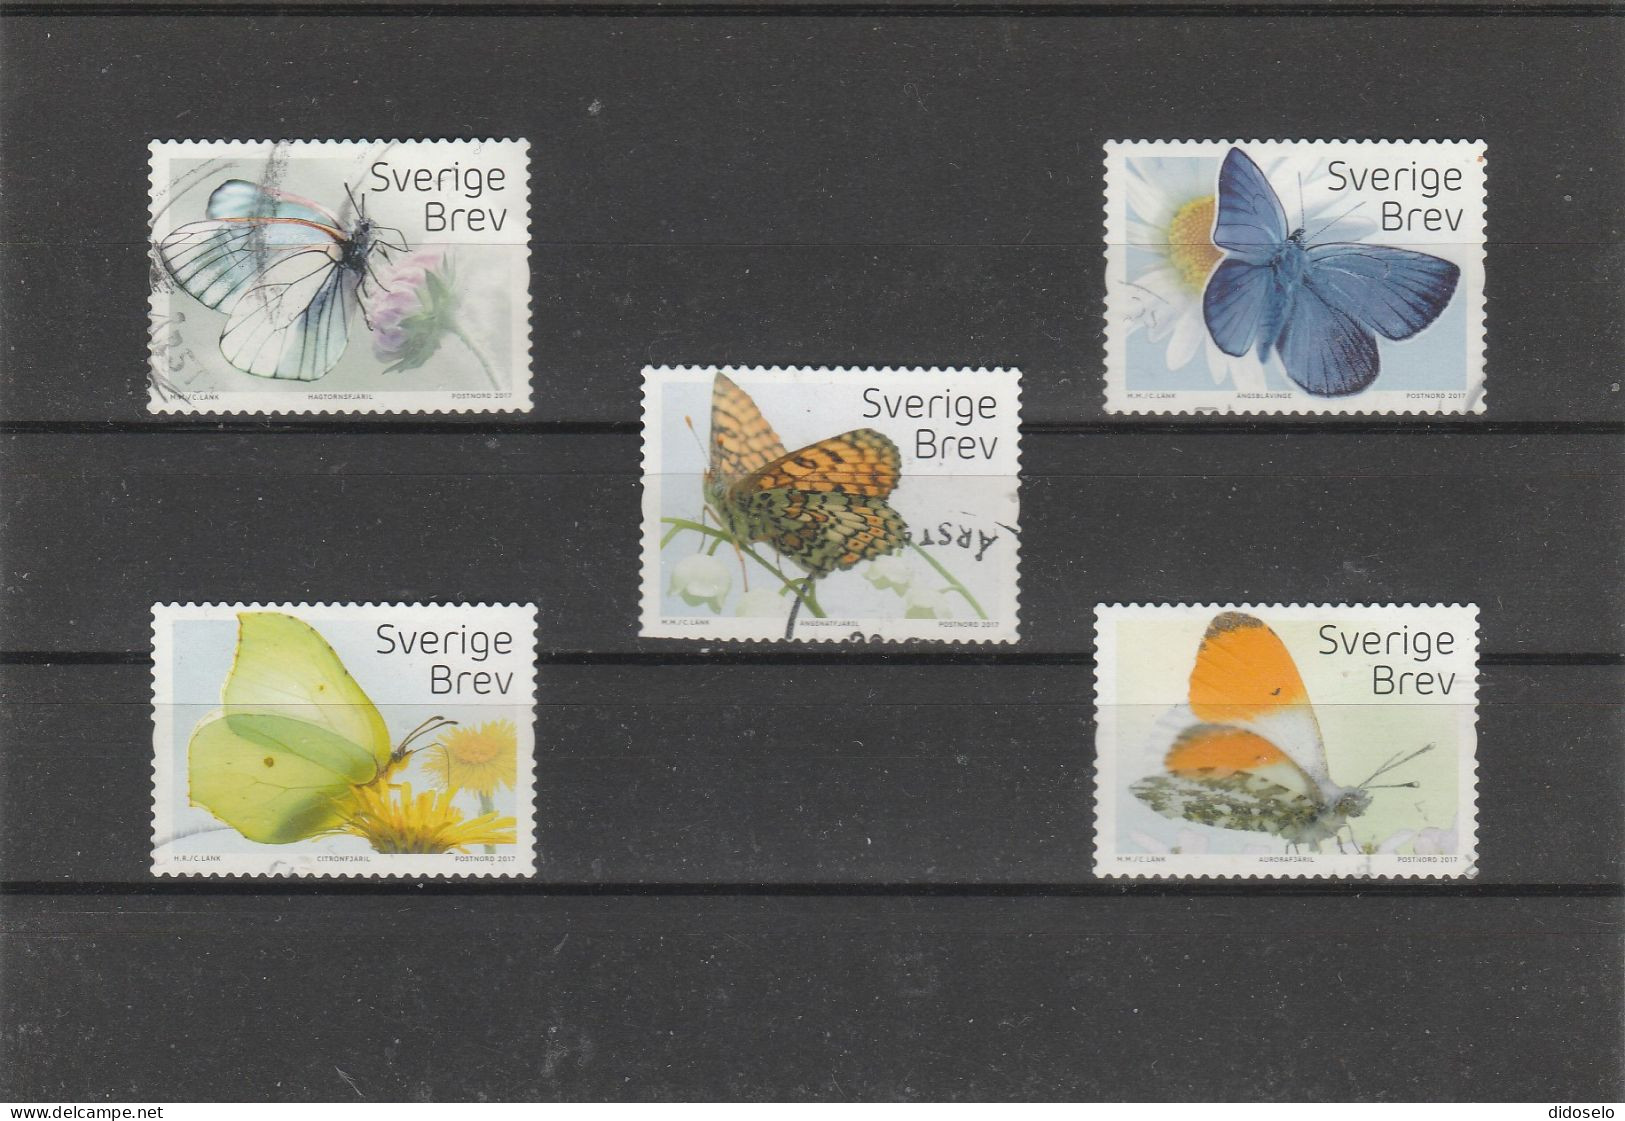 Sweden - 2017 - Butterflies / Used Set - Used Stamps